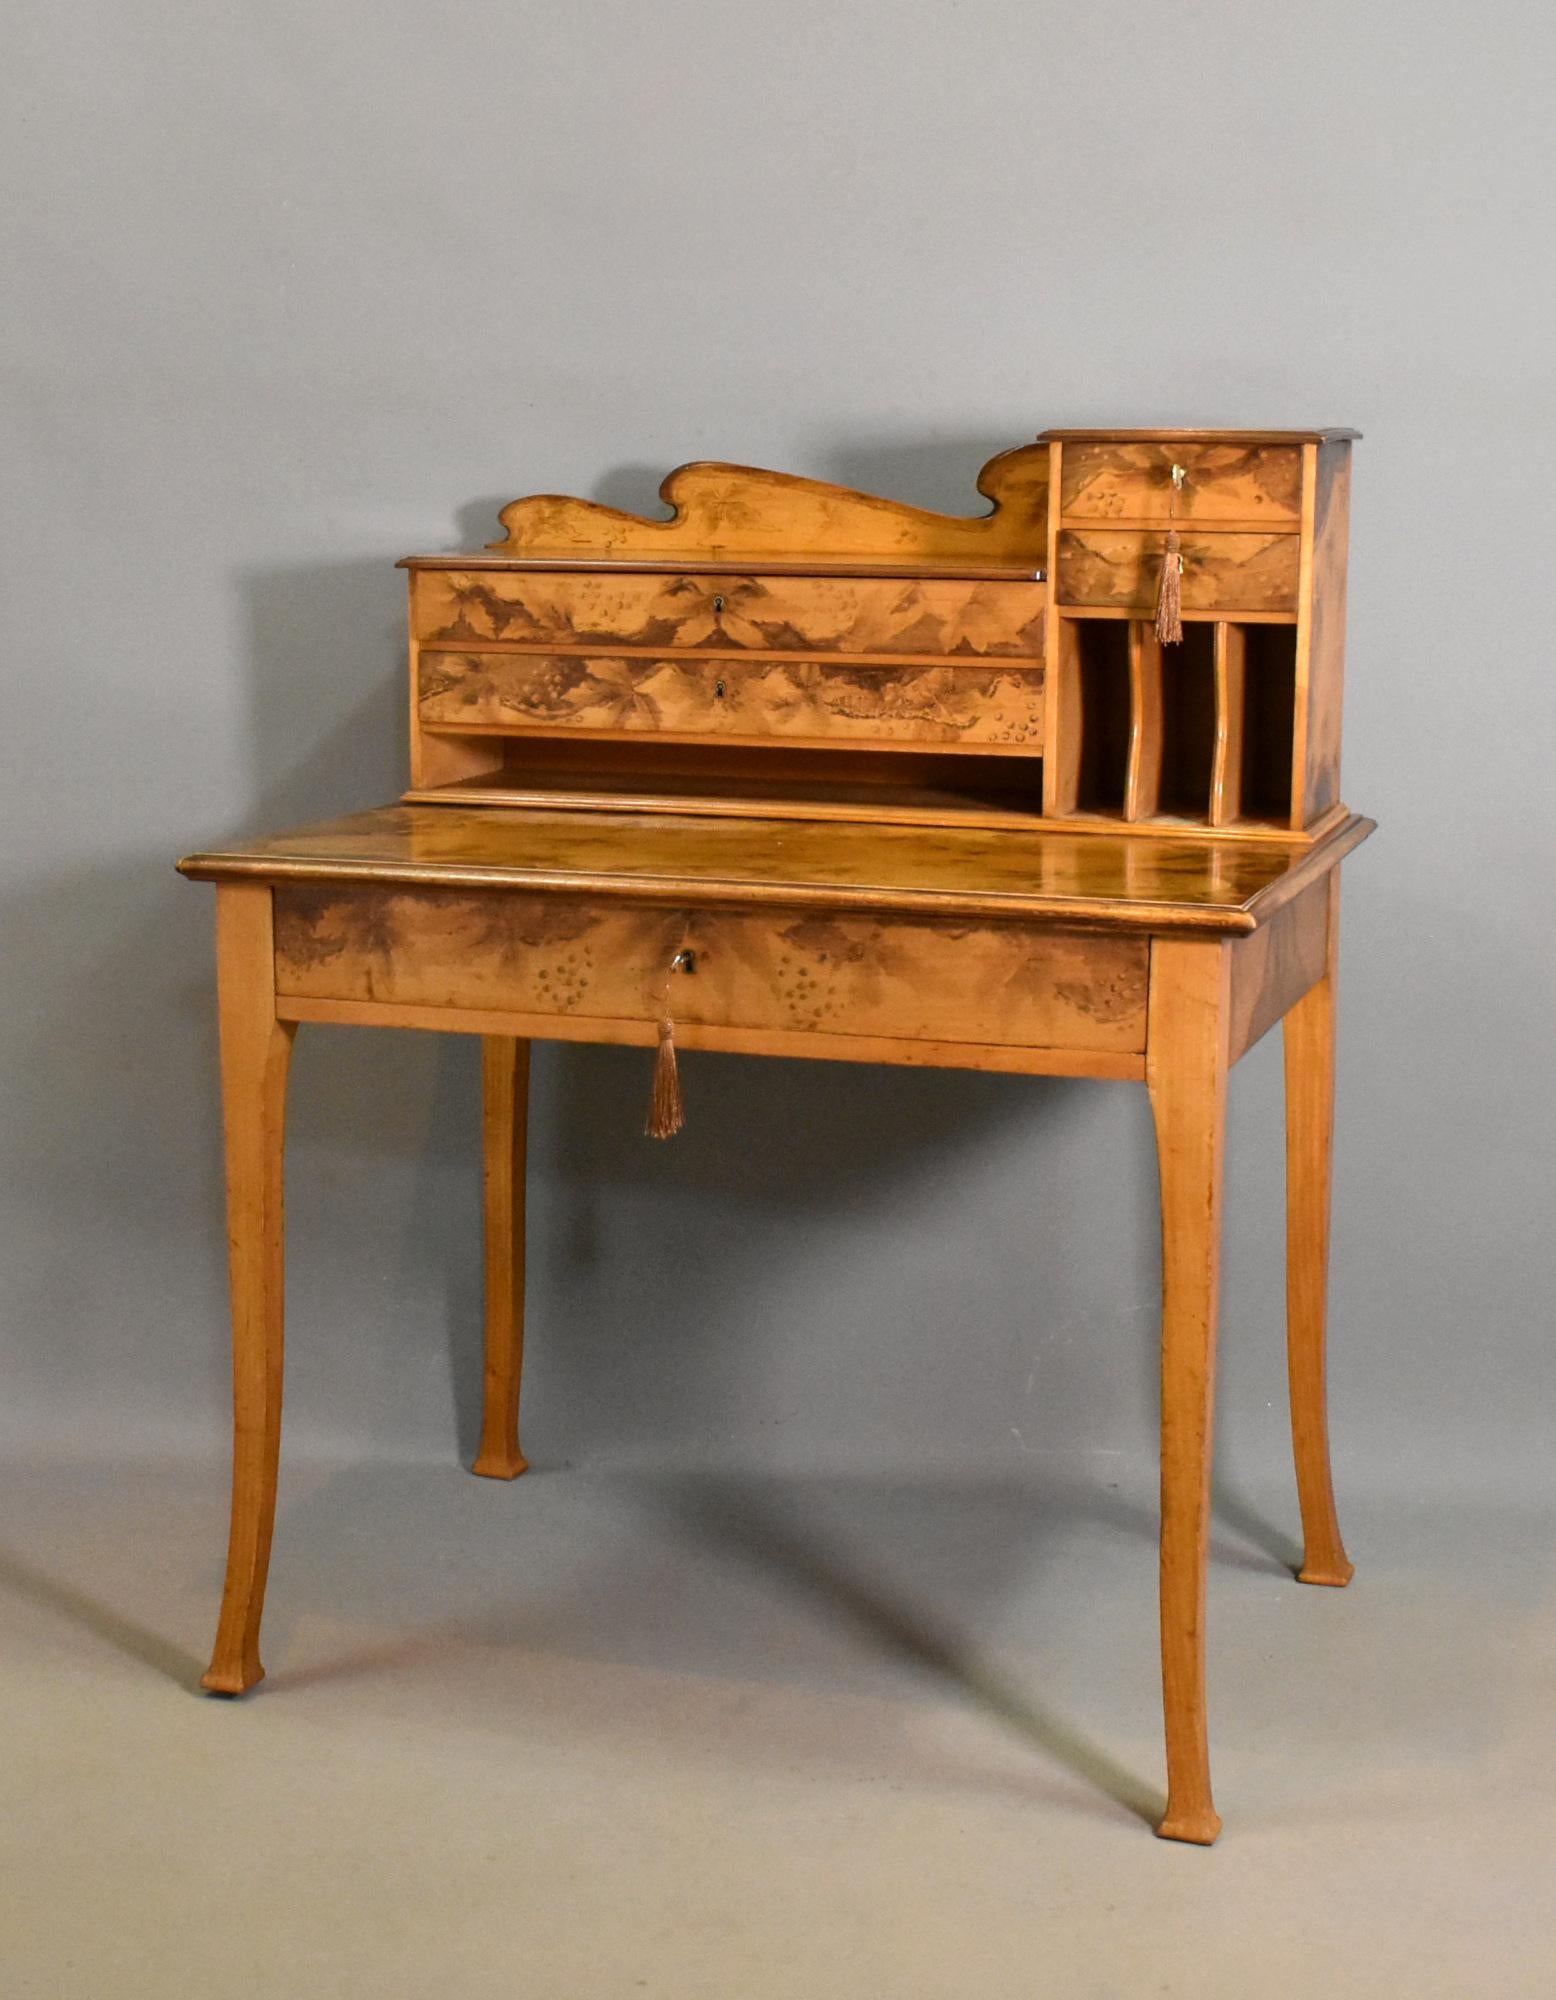 Hand-Crafted Art Nouveau Tiered Pyrography Etched Desk For Sale